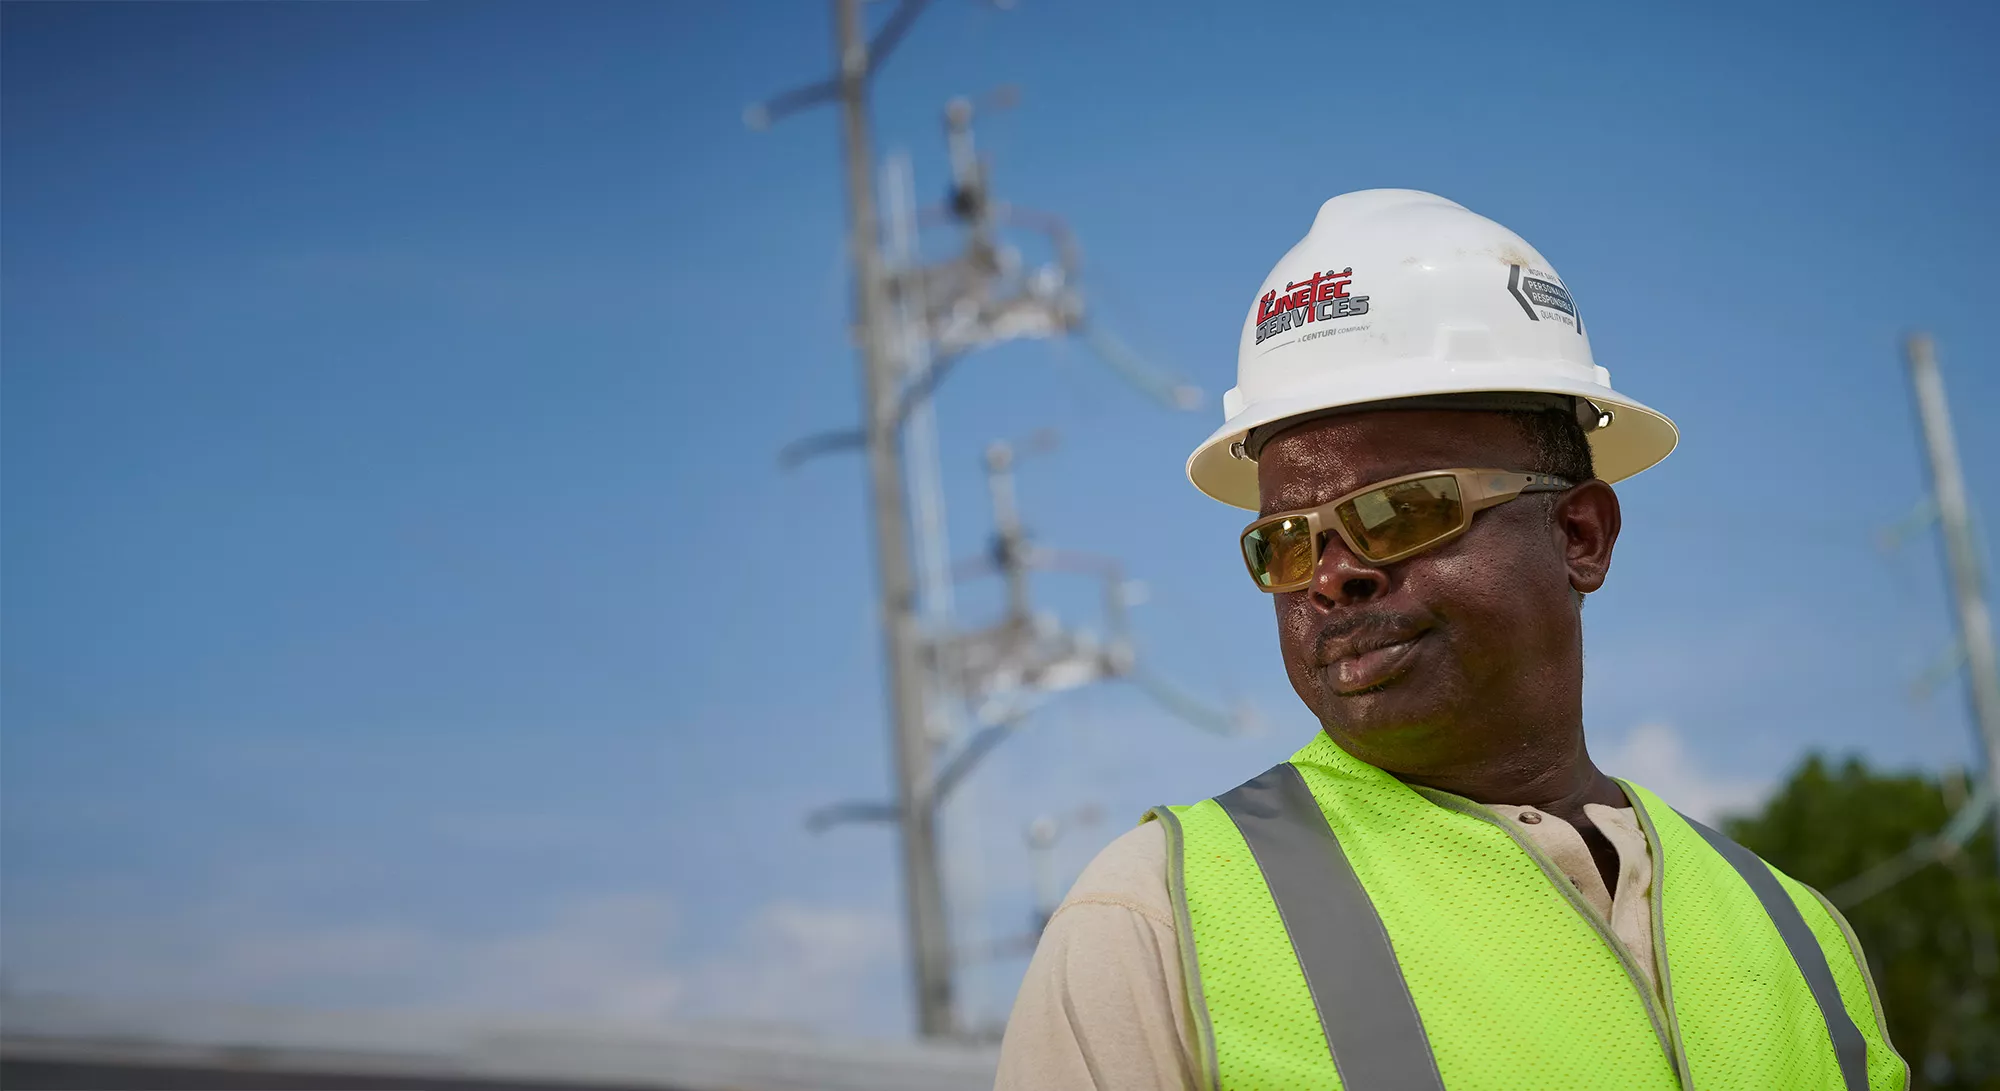 A man of color wearing a Linetec hard hat looks out over power lines.